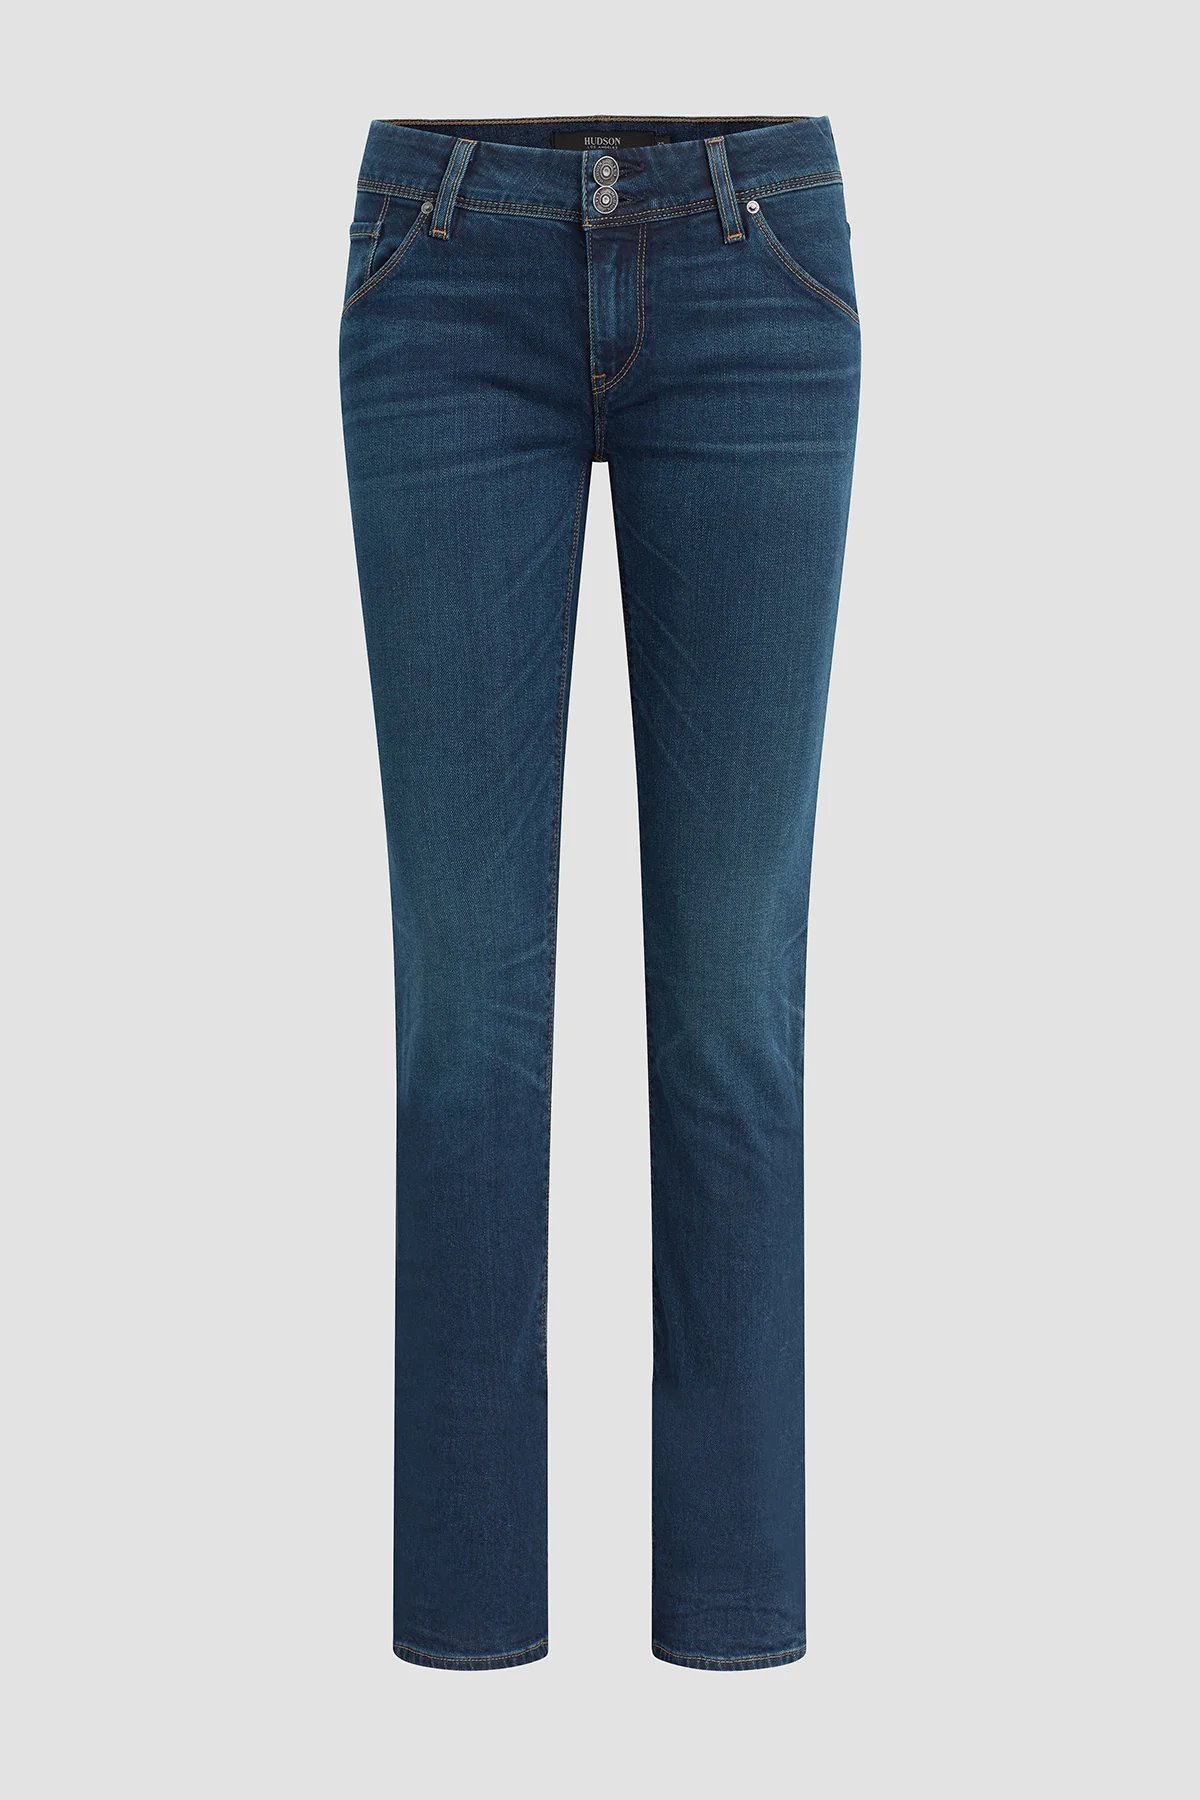 Hudson Jeans Obscurity Collin Mid-Rise Skinny Jean | Verishop